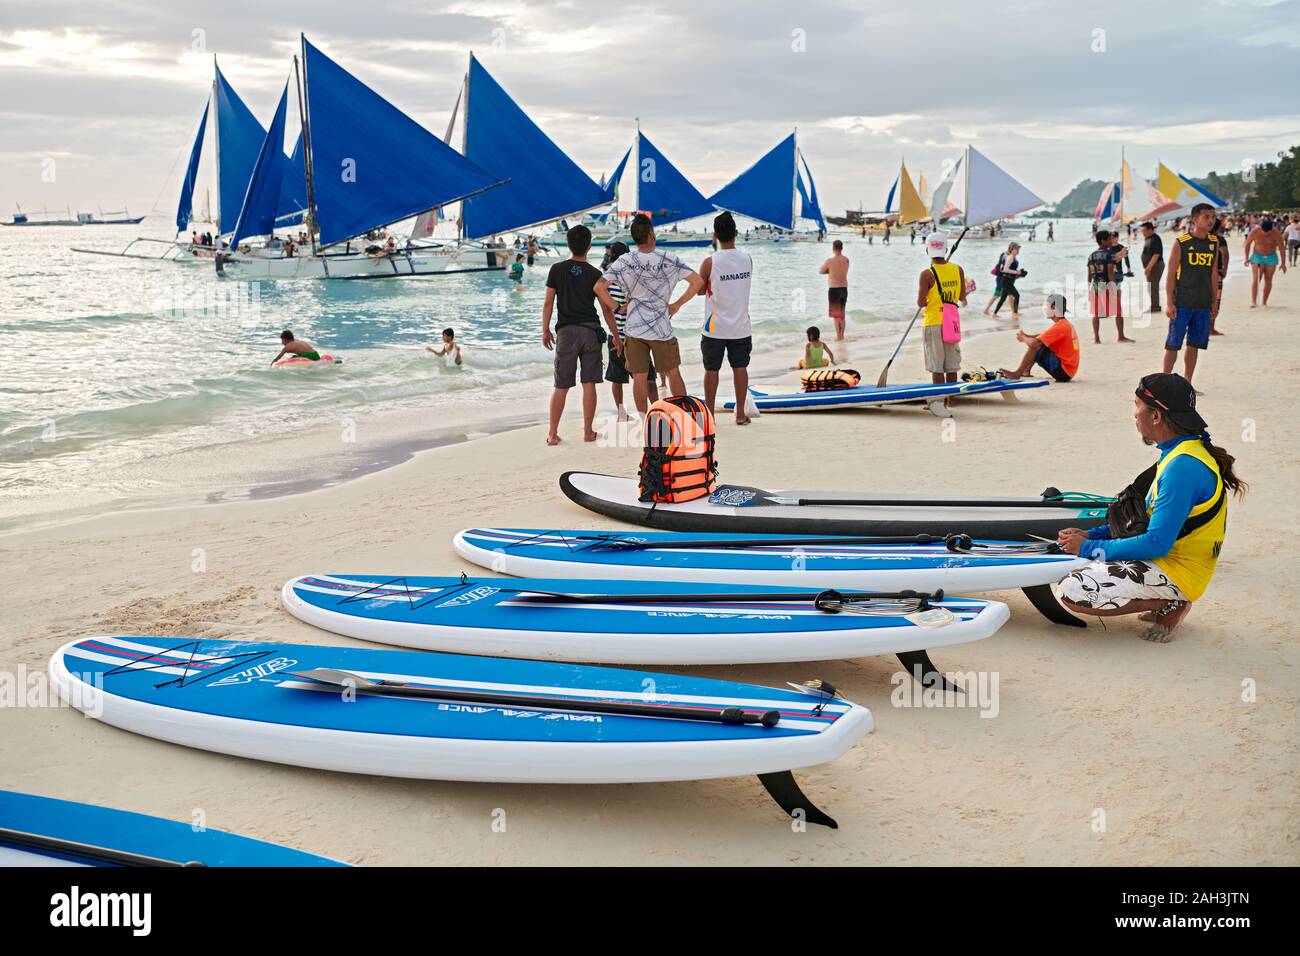 Boracay, Aklan Province, Philippines - January 6 2018: Sunset scenery at the White Beach with paddle boards and sailing boats waiting for tourists Stock Photo